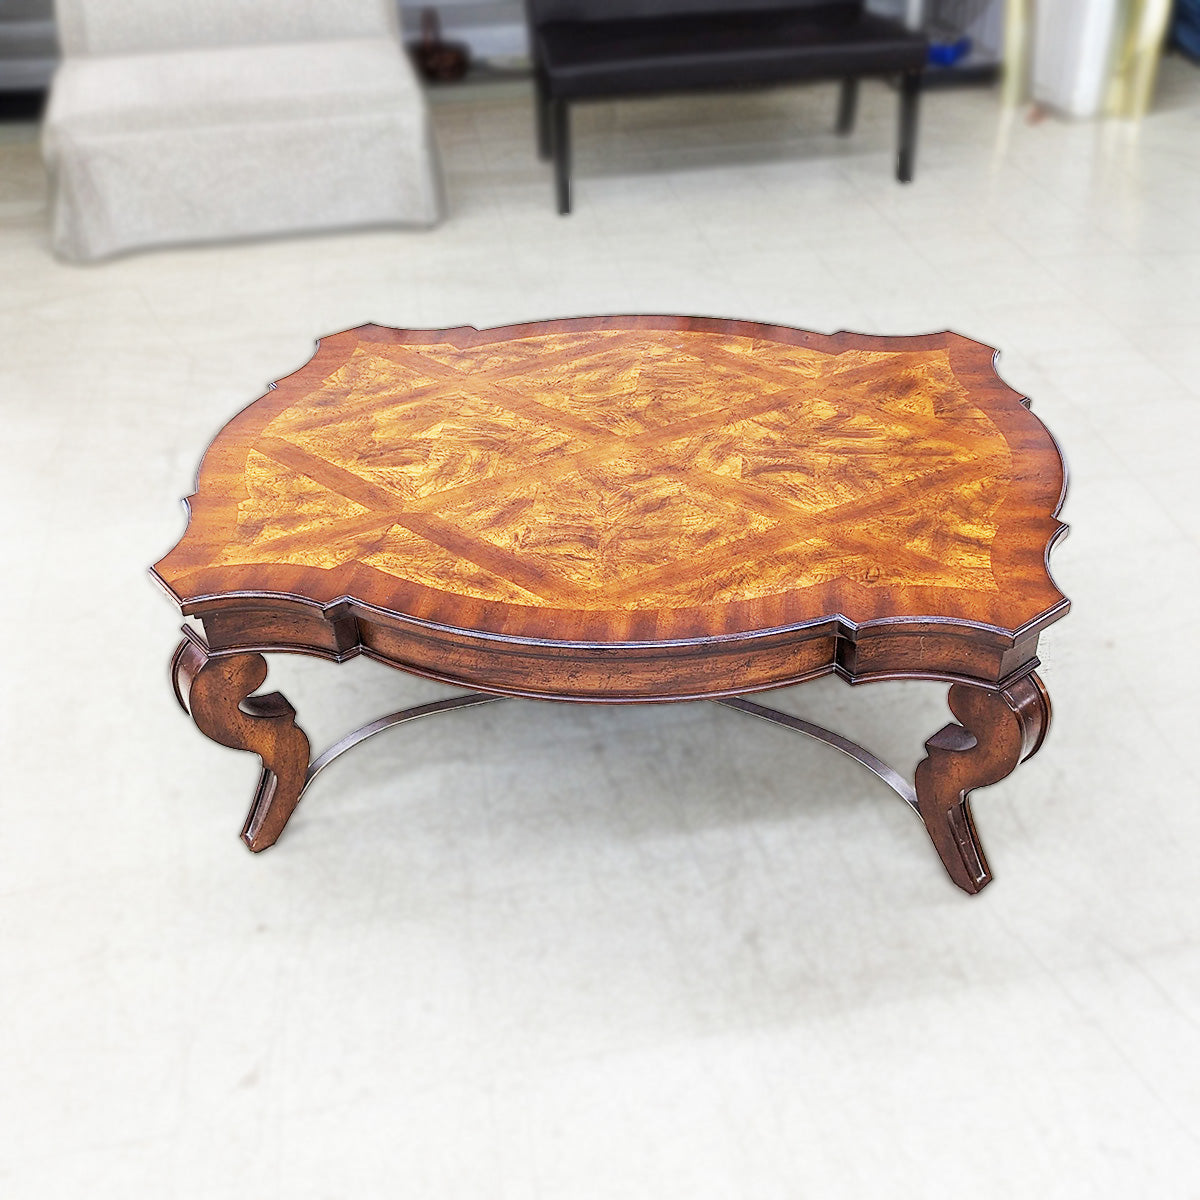 Large Wood Parquet Coffee Table - Habroc - Online ReStore